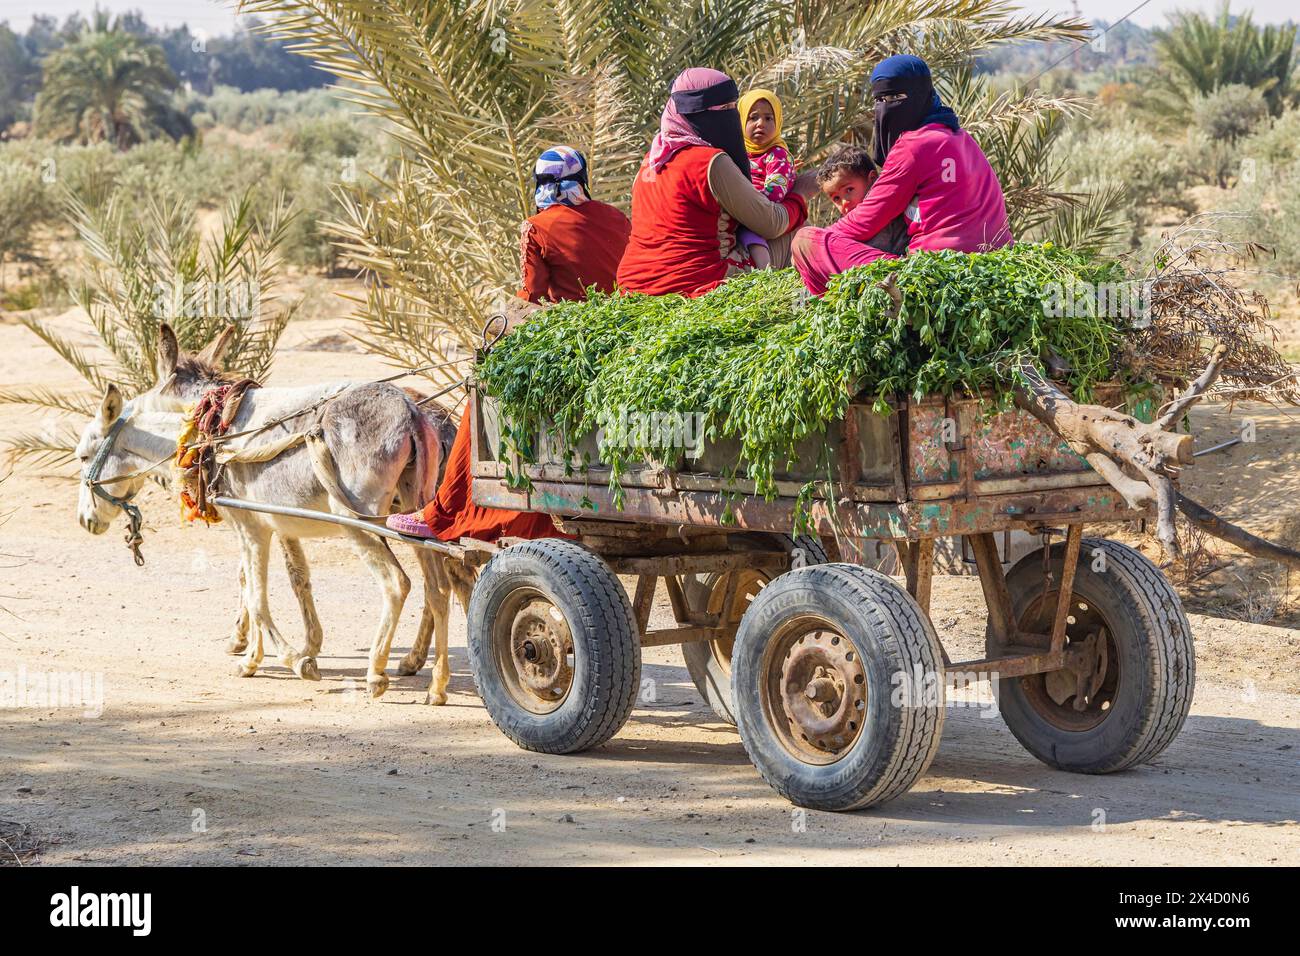 Wadi al Hitan, Faiyum, Egypt. Village women bringing their crop to market with a donkey cart. (Editorial Use Only) Stock Photo